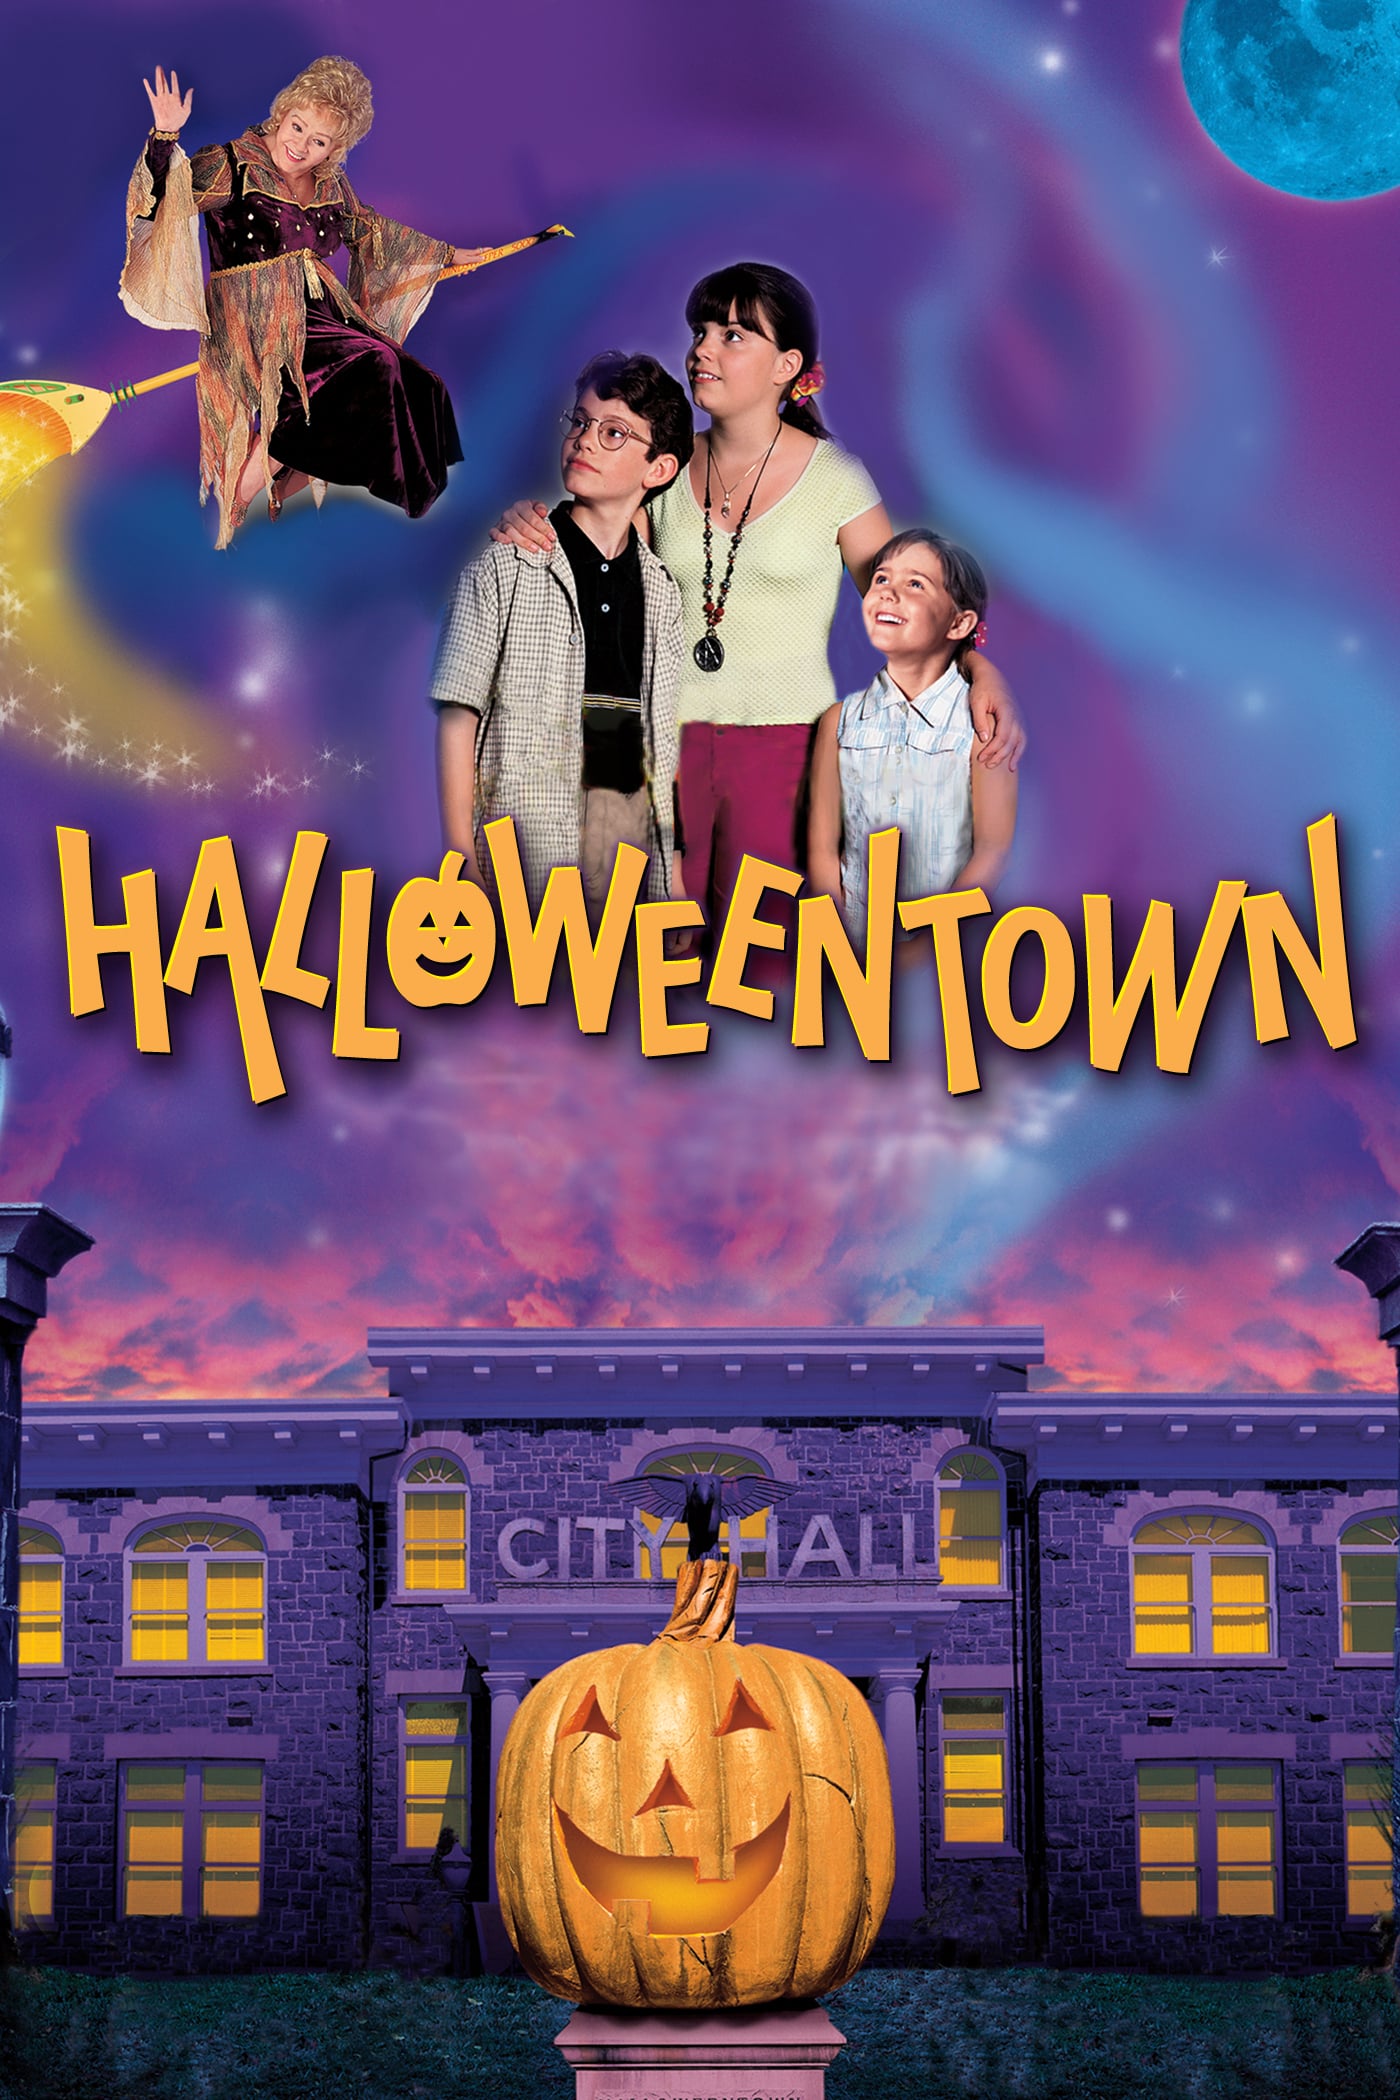 Poster for the movie "Halloweentown"